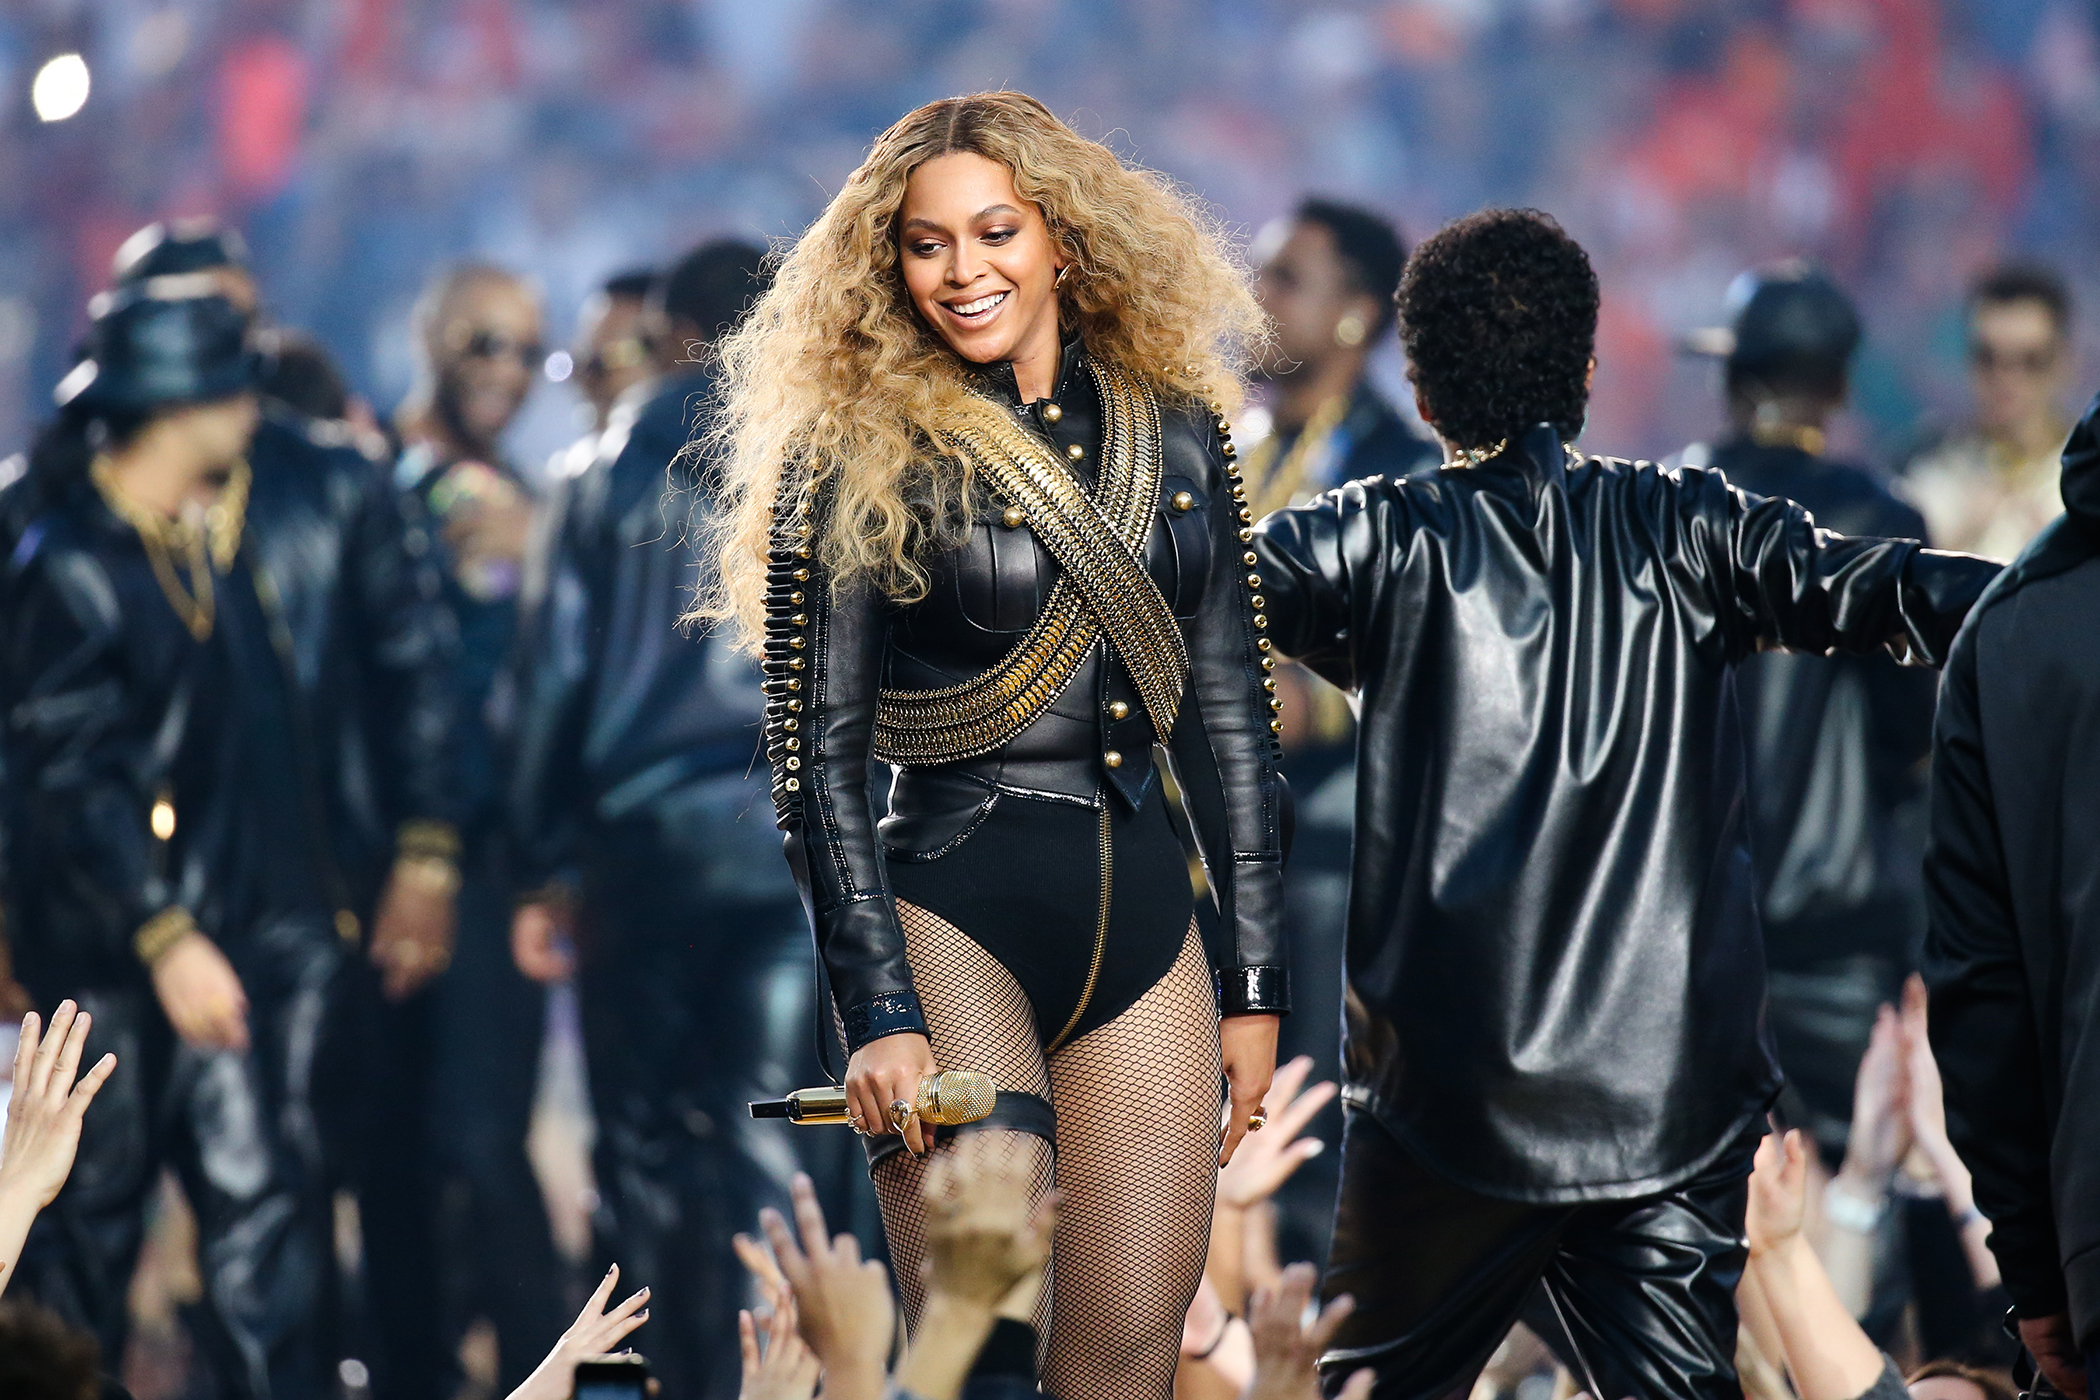 Beyonce performs during the halftime show at Super Bowl 50 between the Denver Broncos and the Carolina Panthers at Levis Stadium in Santa Clara, California on February 7, 2016.